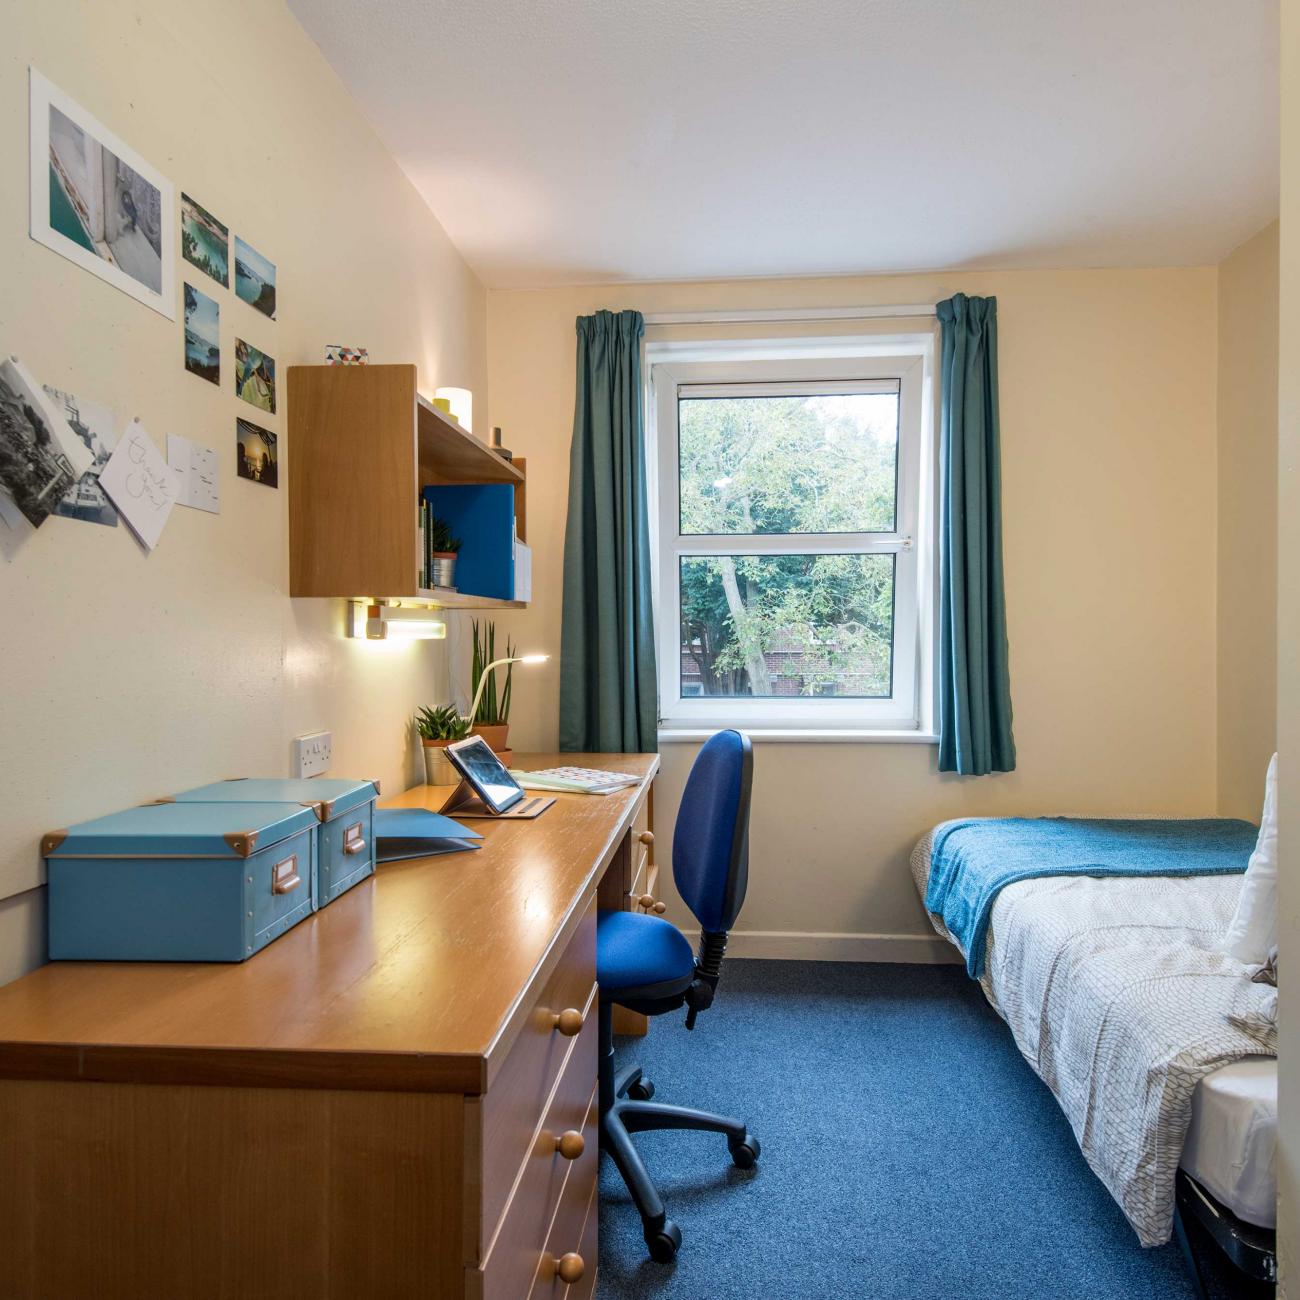 A bright, airy student bedroom with desk and single bed.